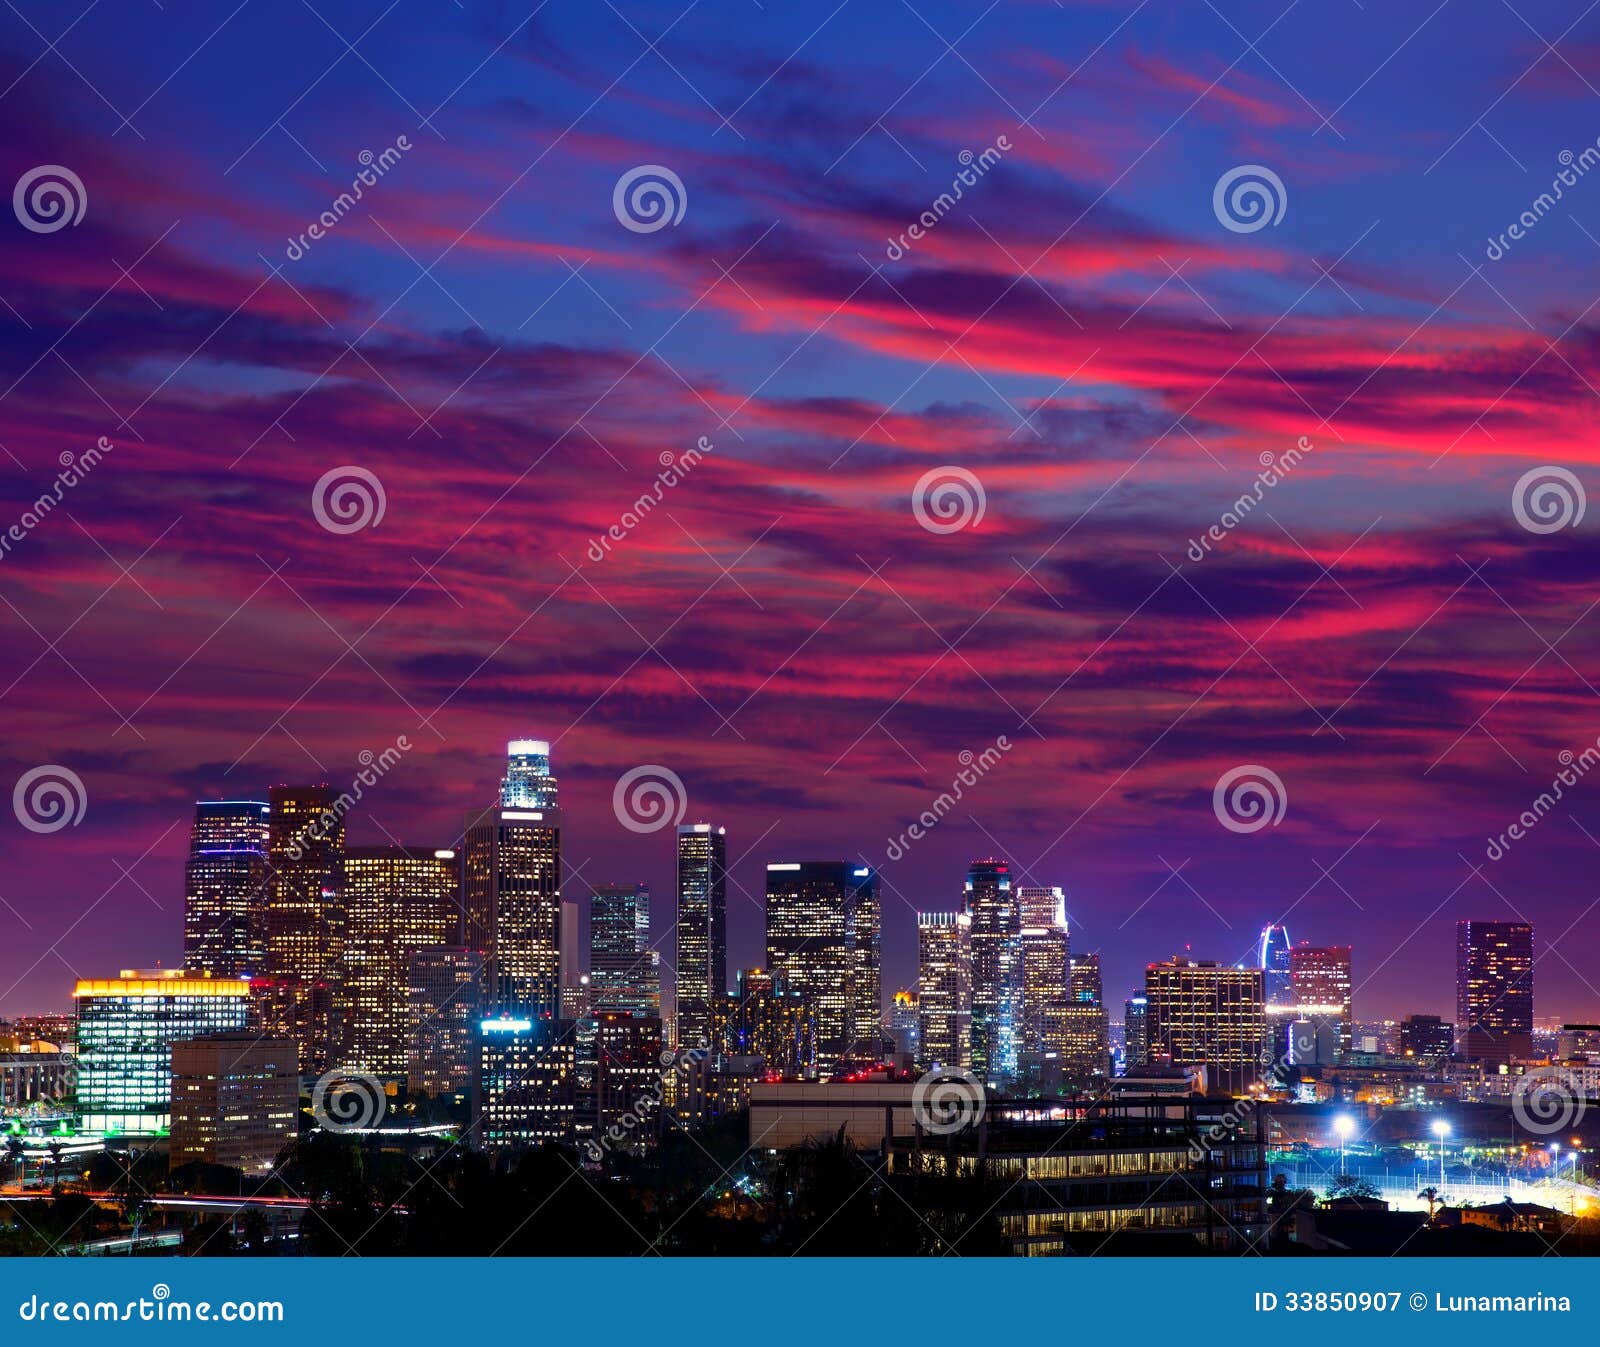 213 Downtown La Night Sunset Skyline California Photos Free Royalty Free Stock Photos From Dreamstime